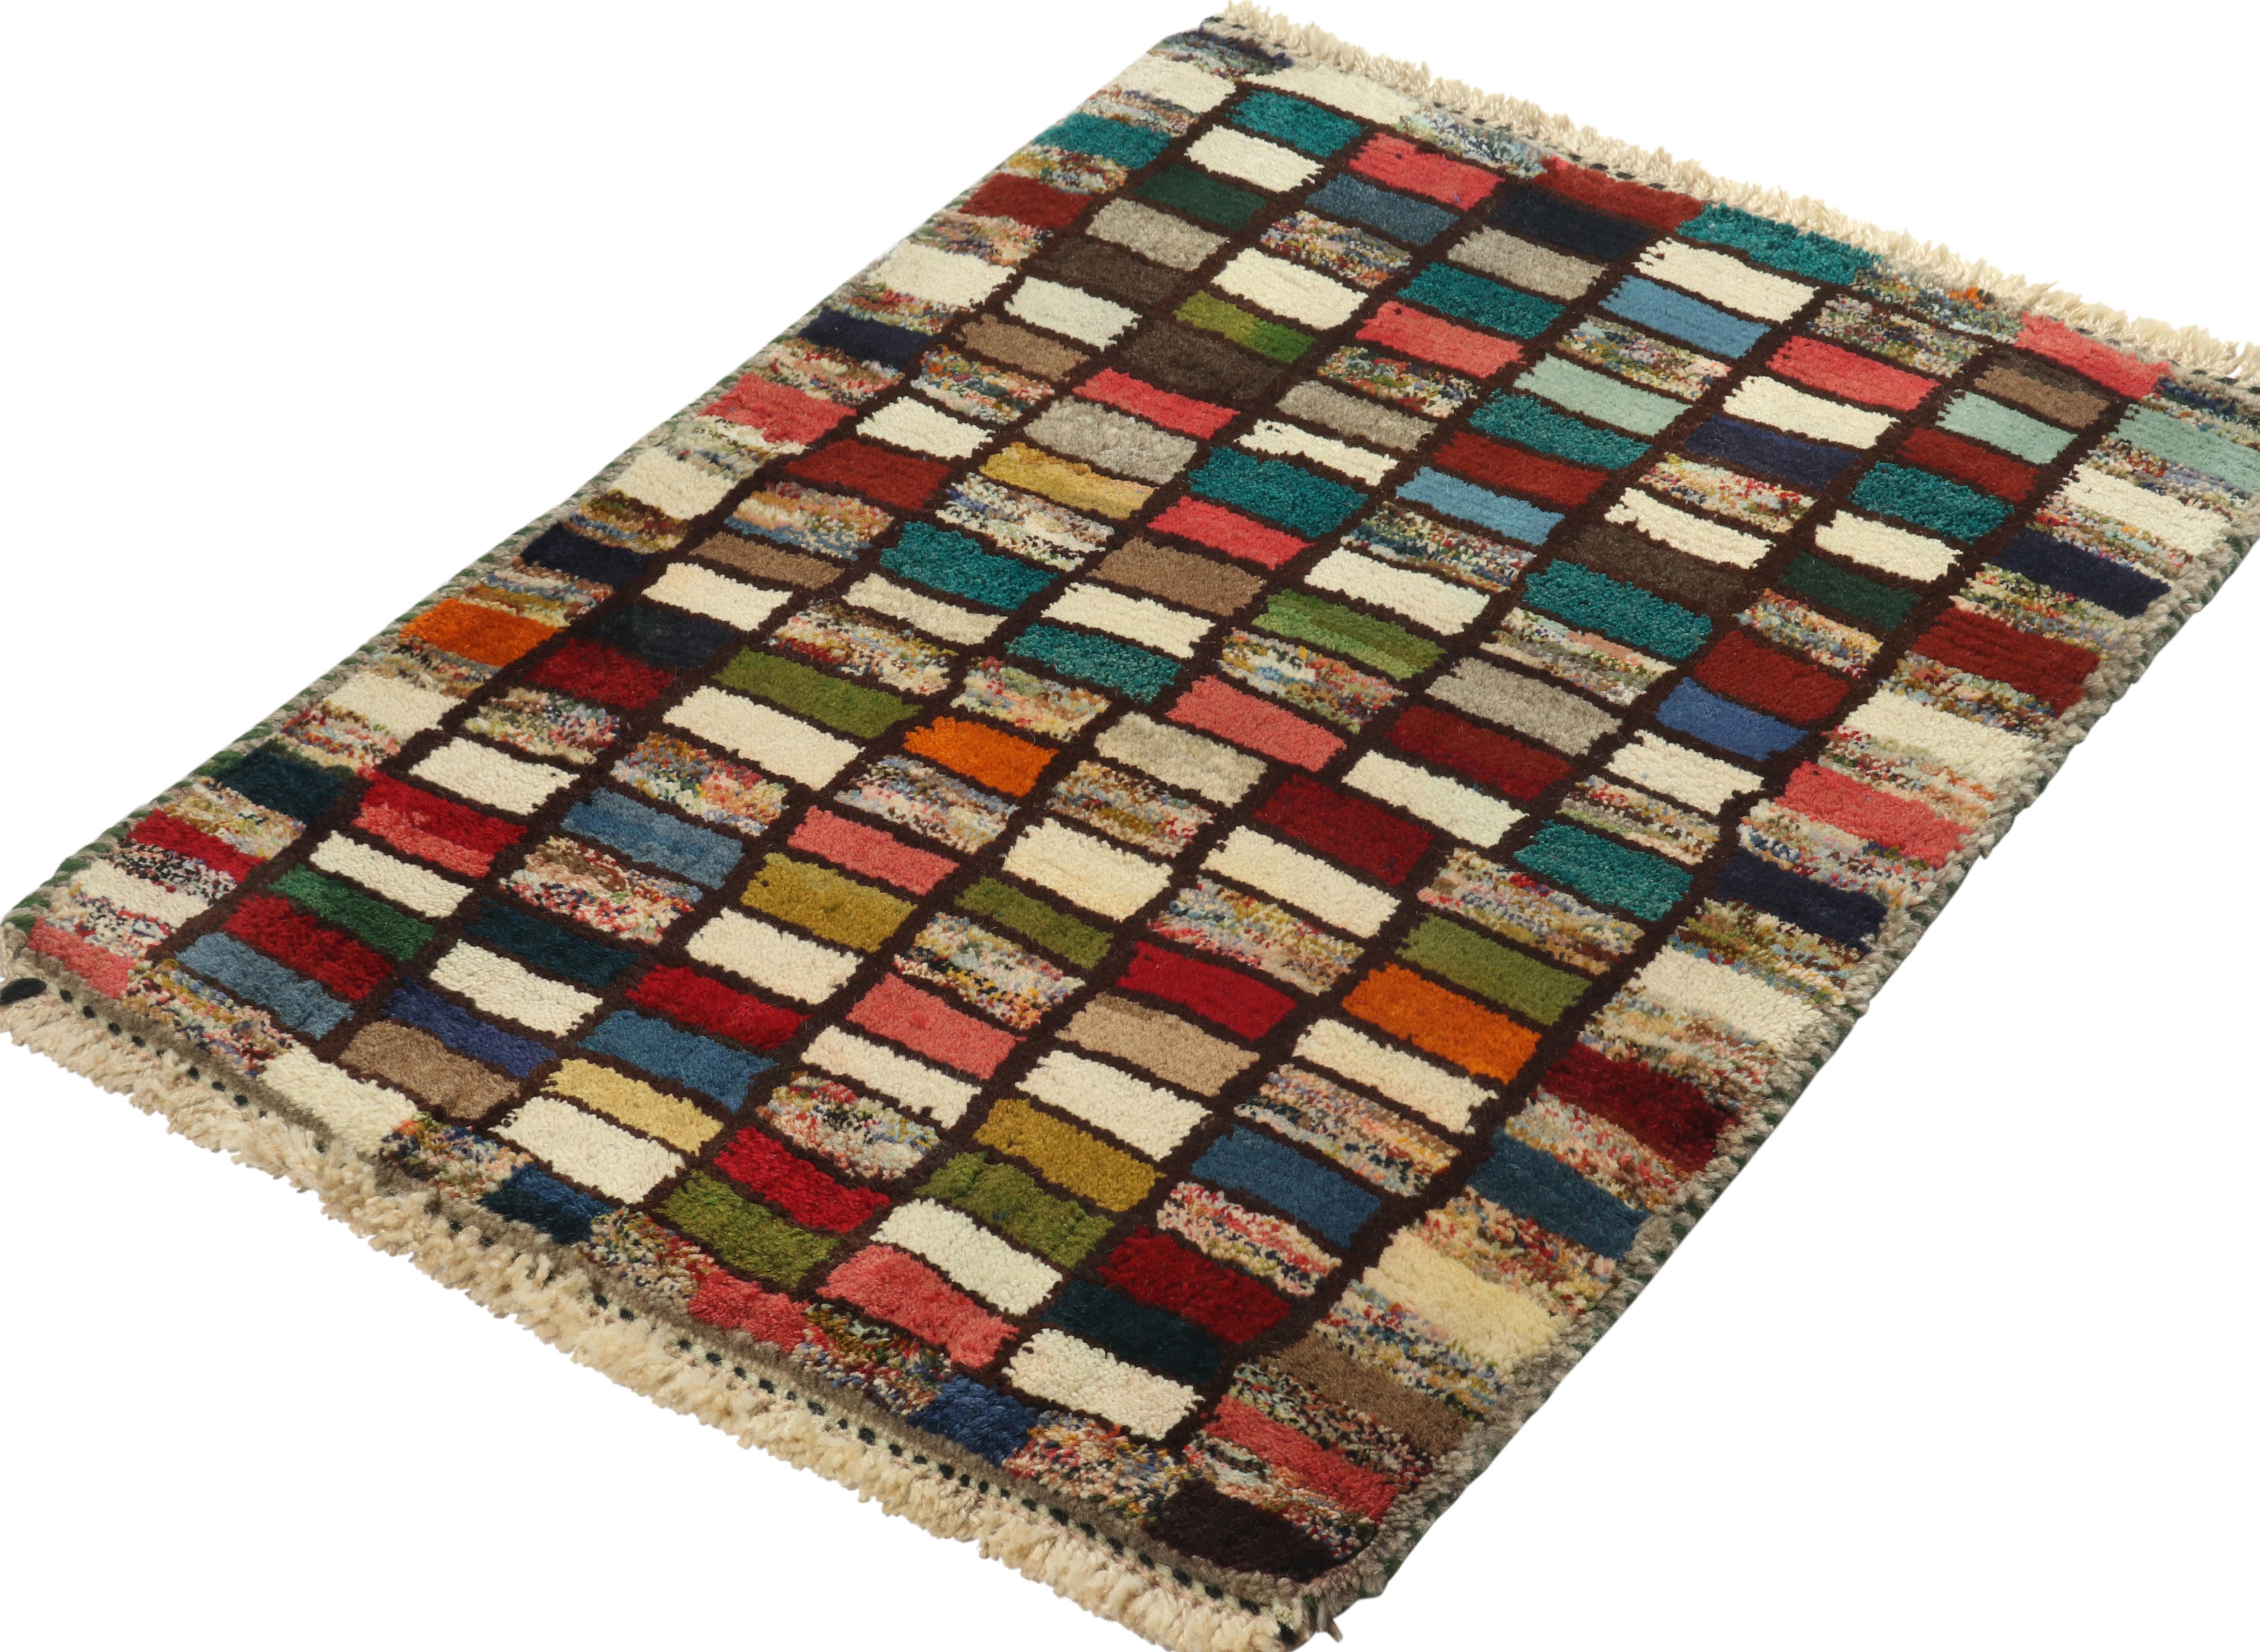 This vintage 2x3 Gabbeh Persian rug is from an exciting new curation of tribal rugs by Rug & Kilim. Hand-knotted in wool, it originates circa 1950-1960.

Further on the Design: 

This tribal provenance is one of the most primitive, and collectible